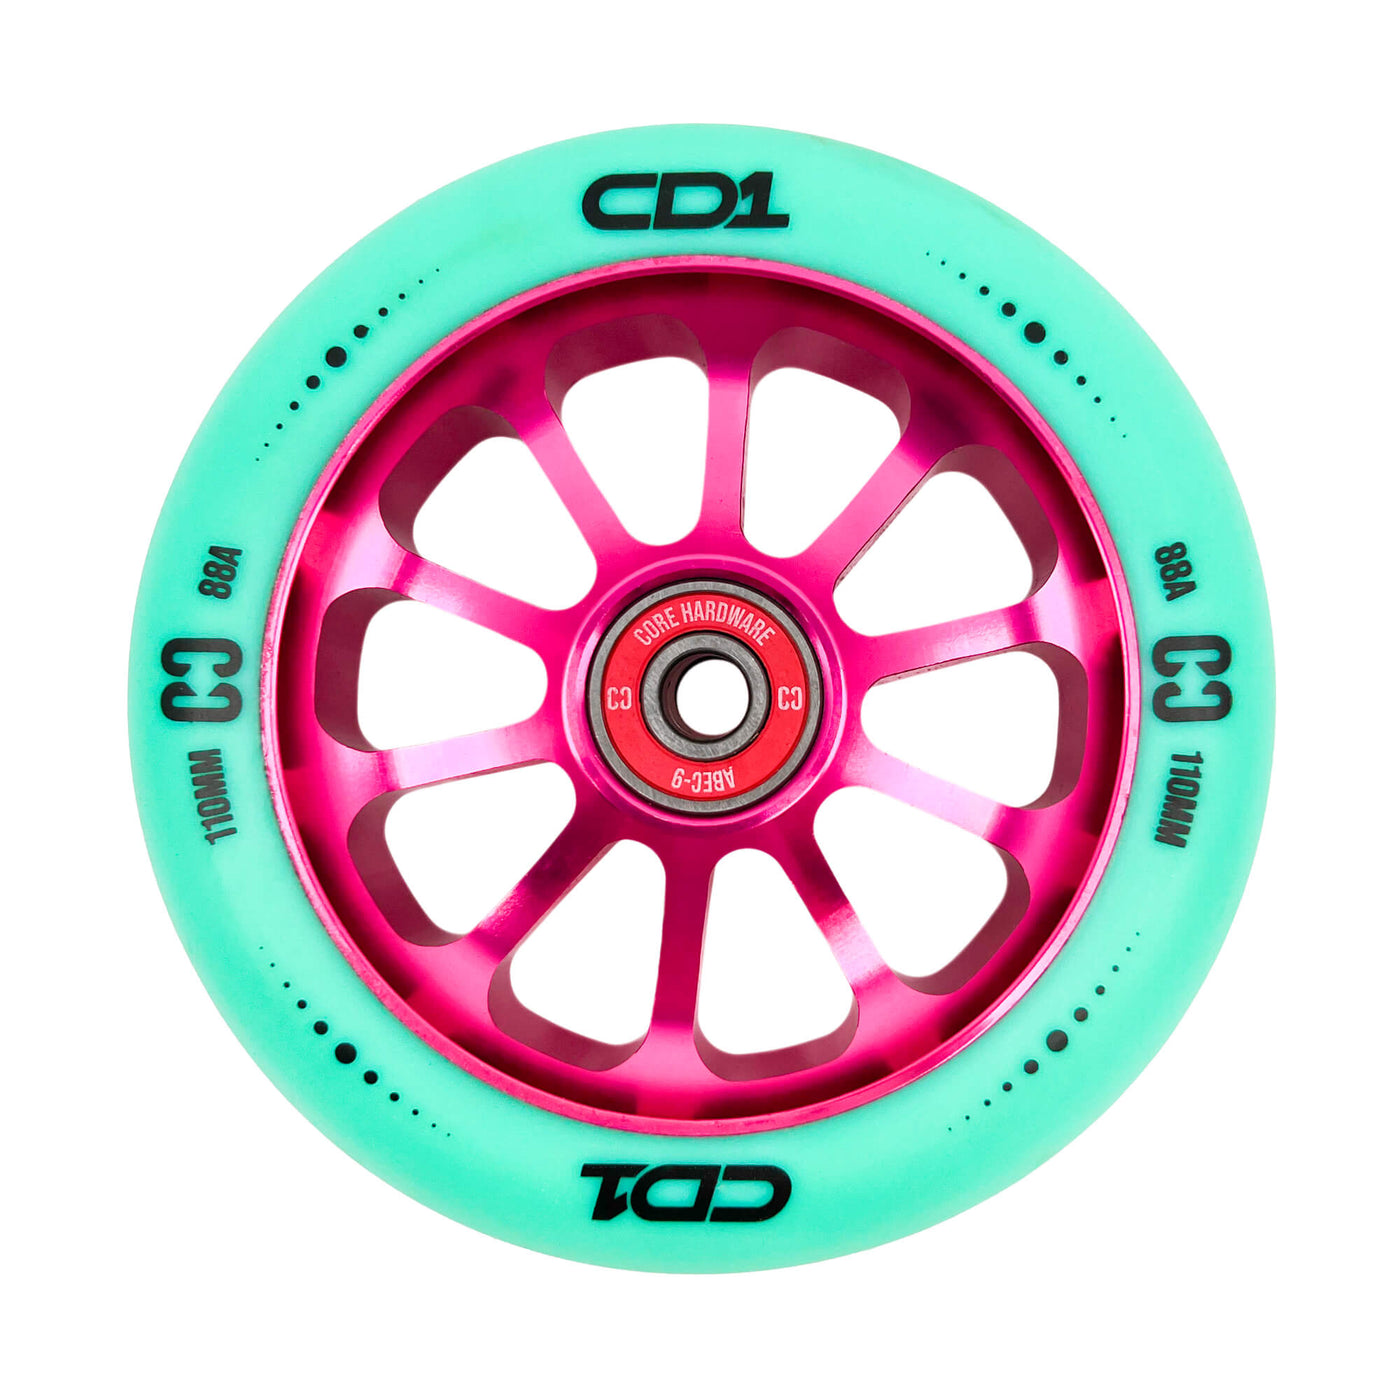 CORE CD1 Spoked Stunt Scooter Wheel 110mm - Teal/Pink